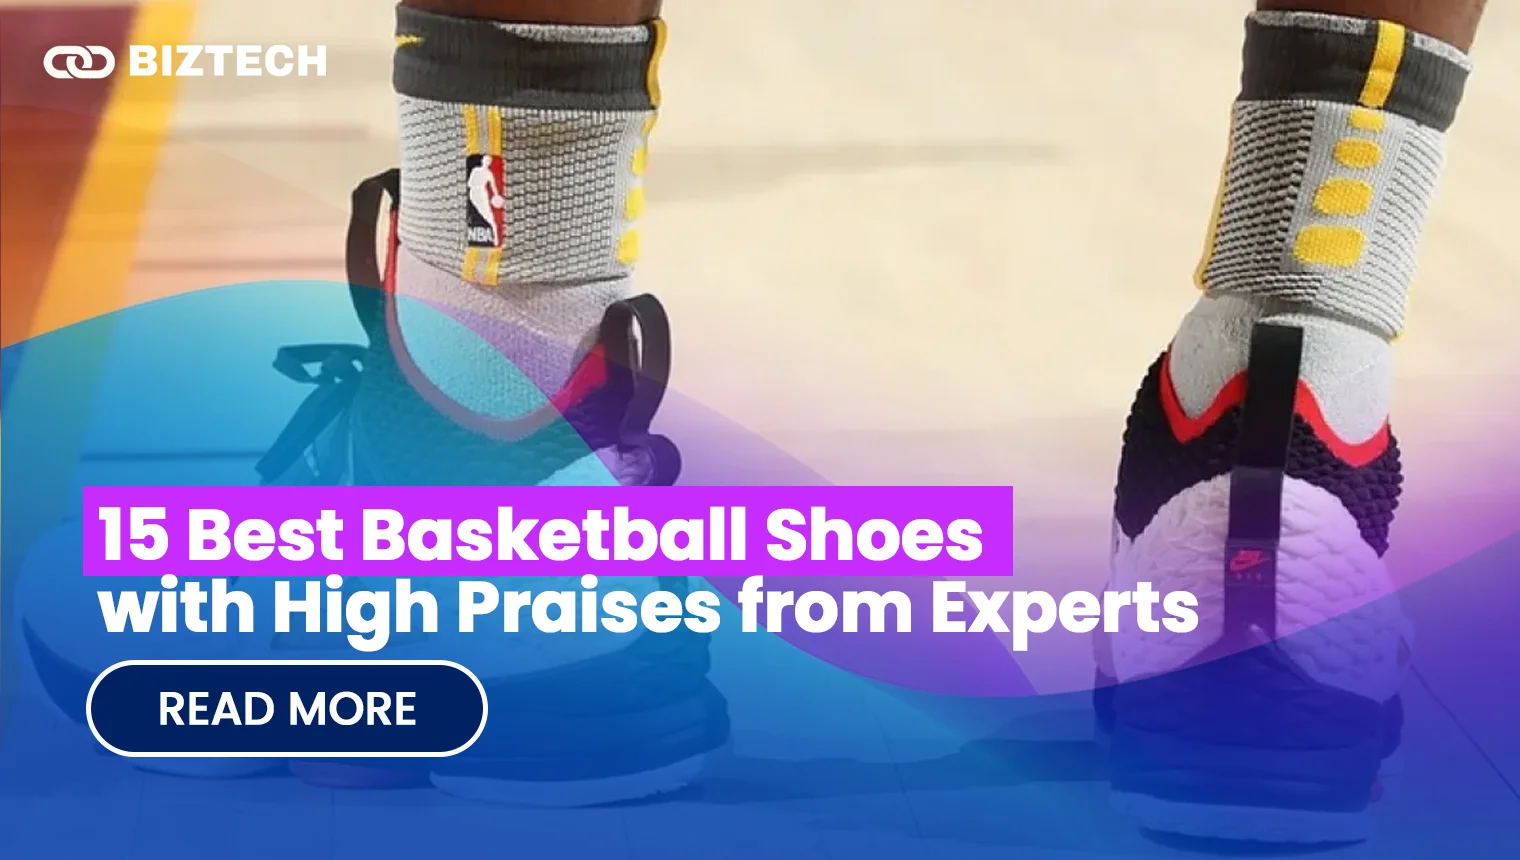 15 Best Basketball Shoes with High Praises from Experts